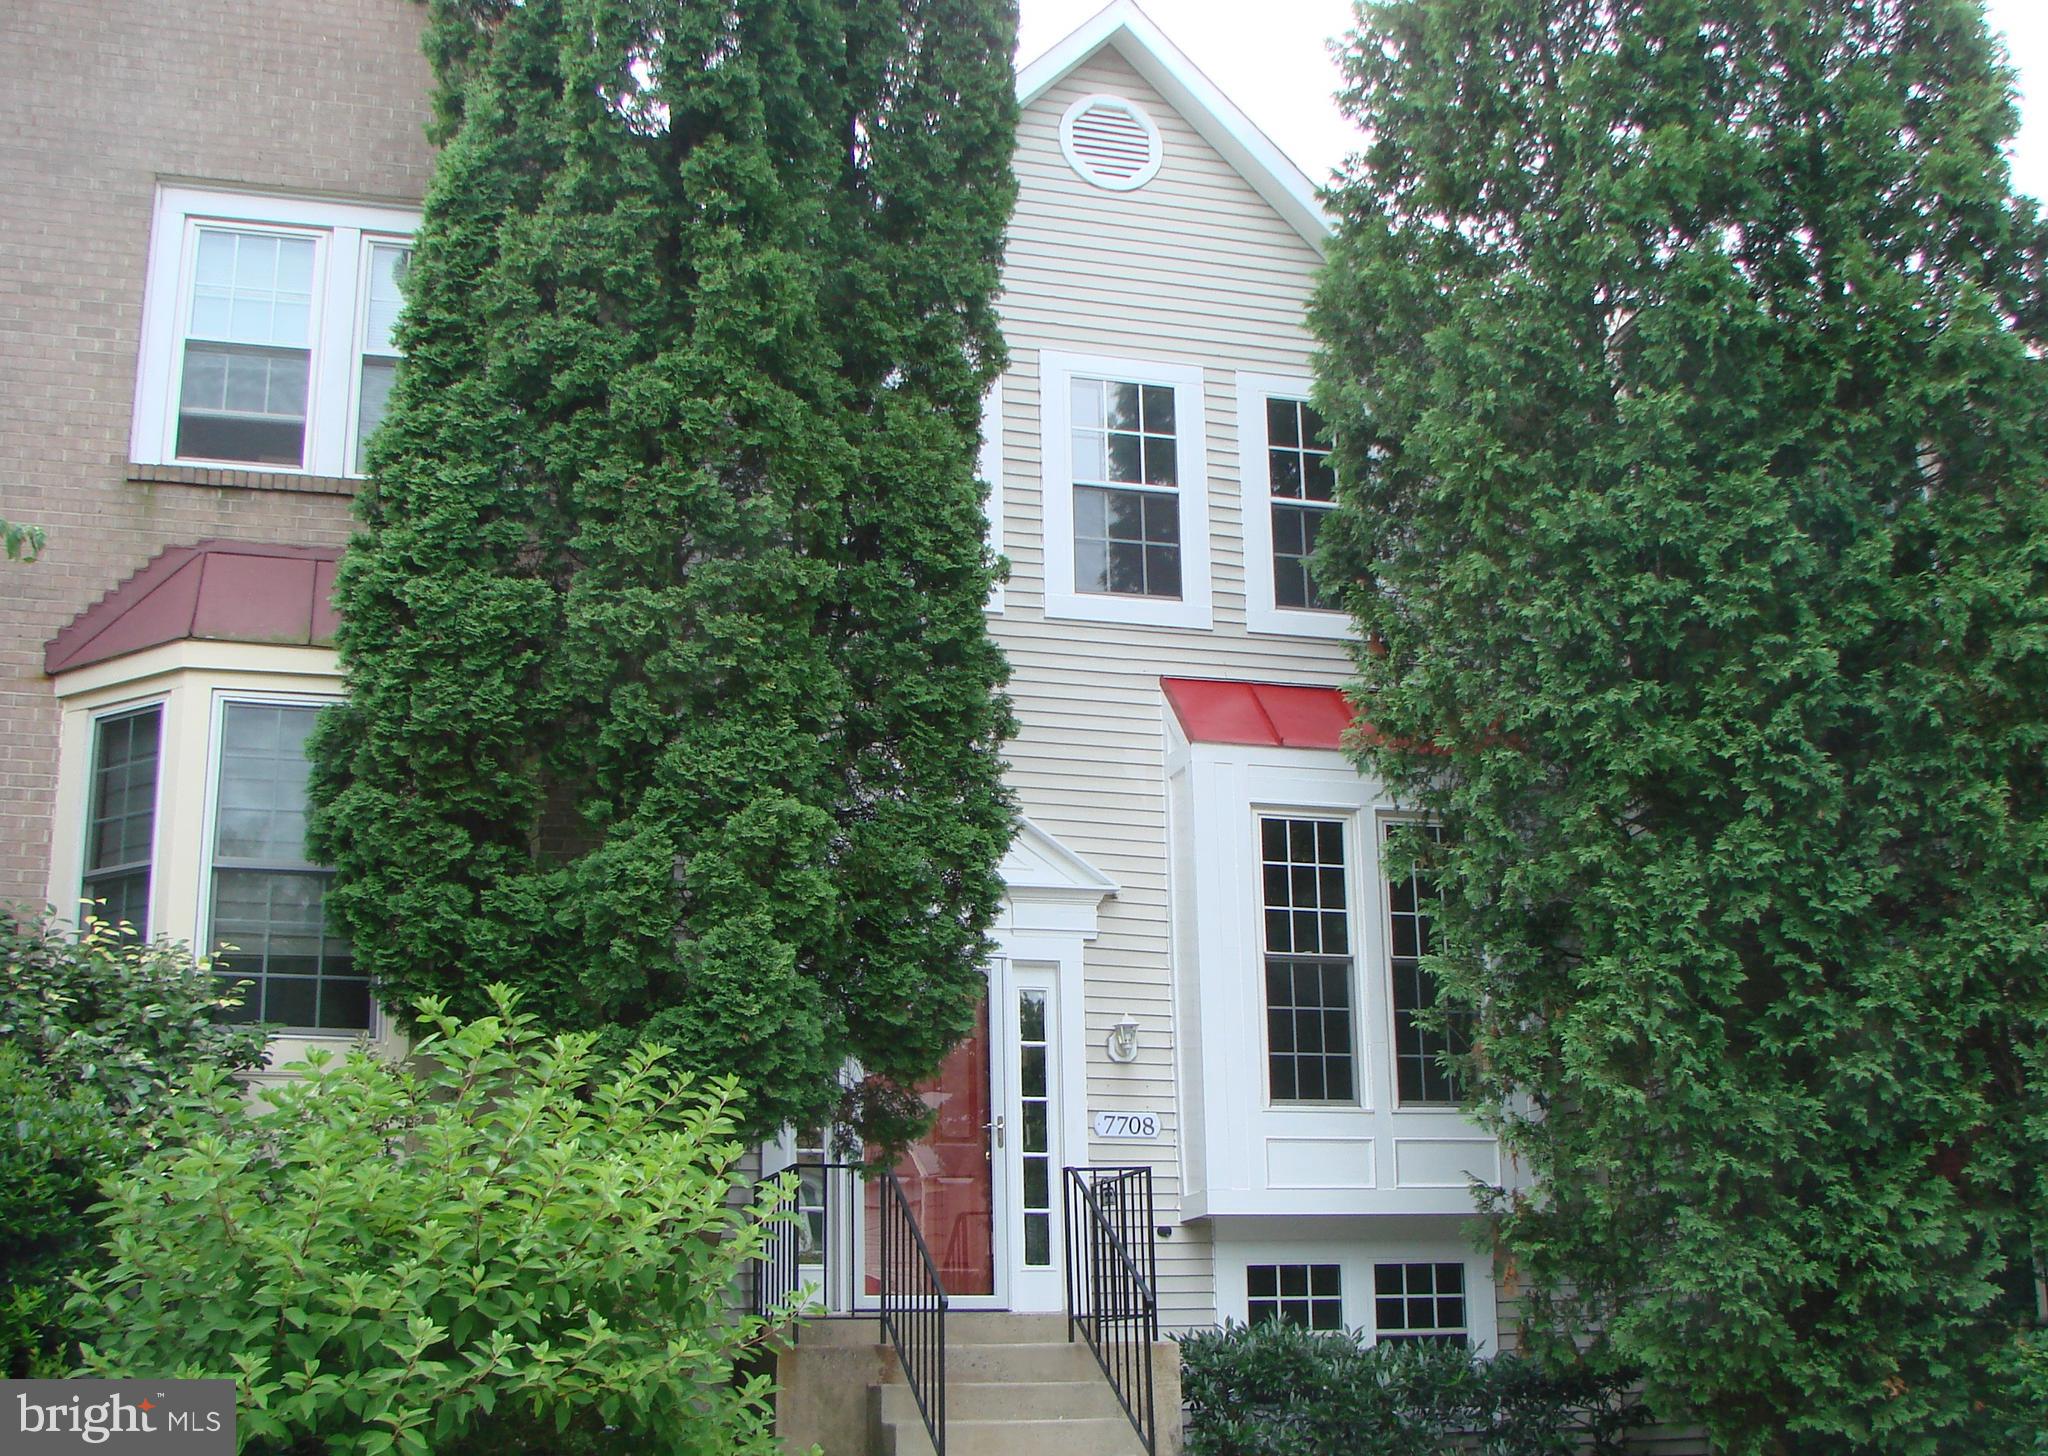 a front view of a house with plants and trees